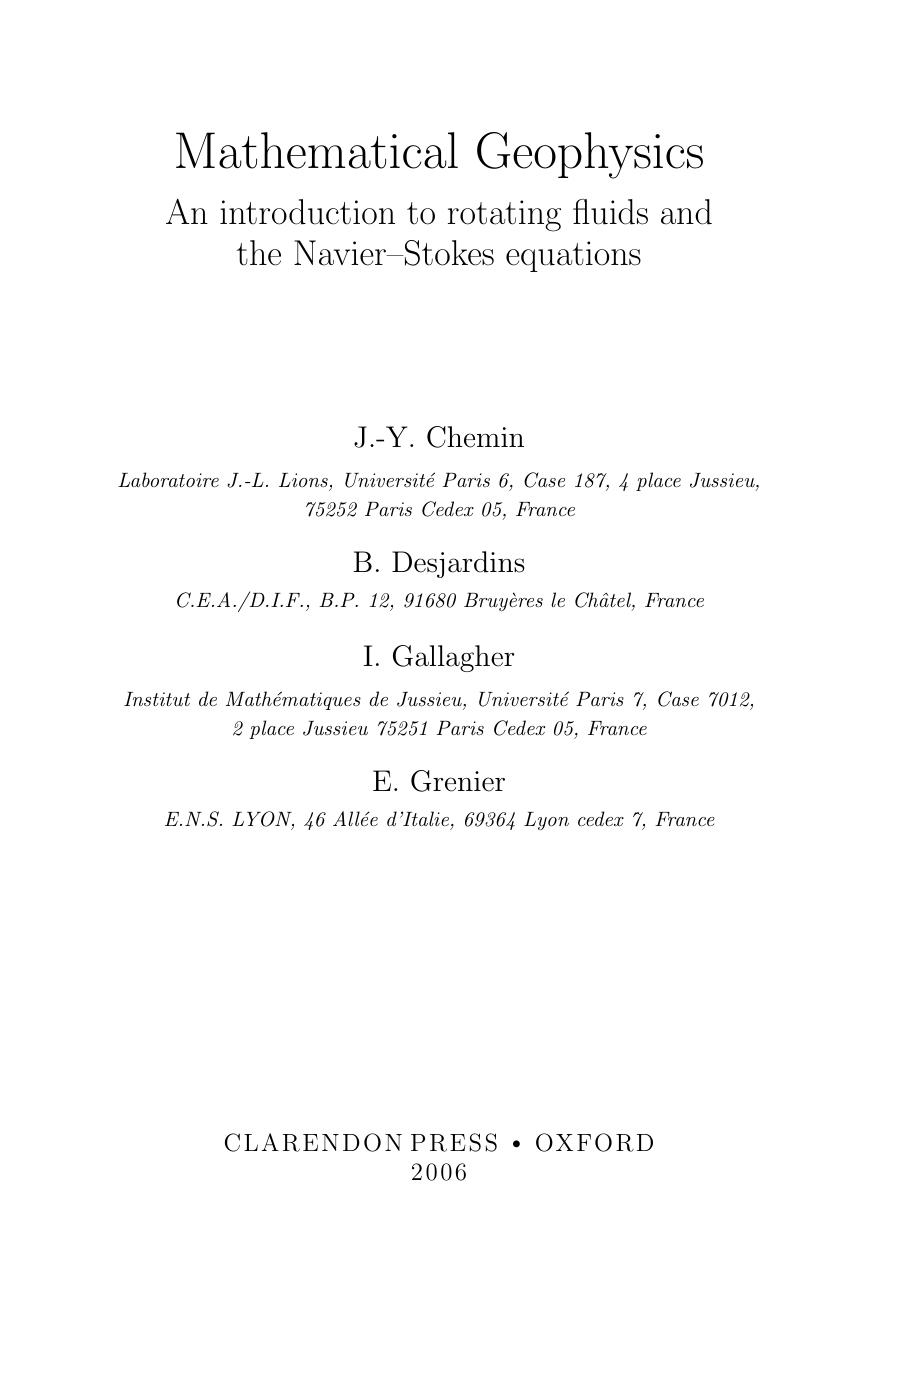 Mathematical Geophysics: An Introduction to Rotating Fluids and the Navier-Stokes Equations